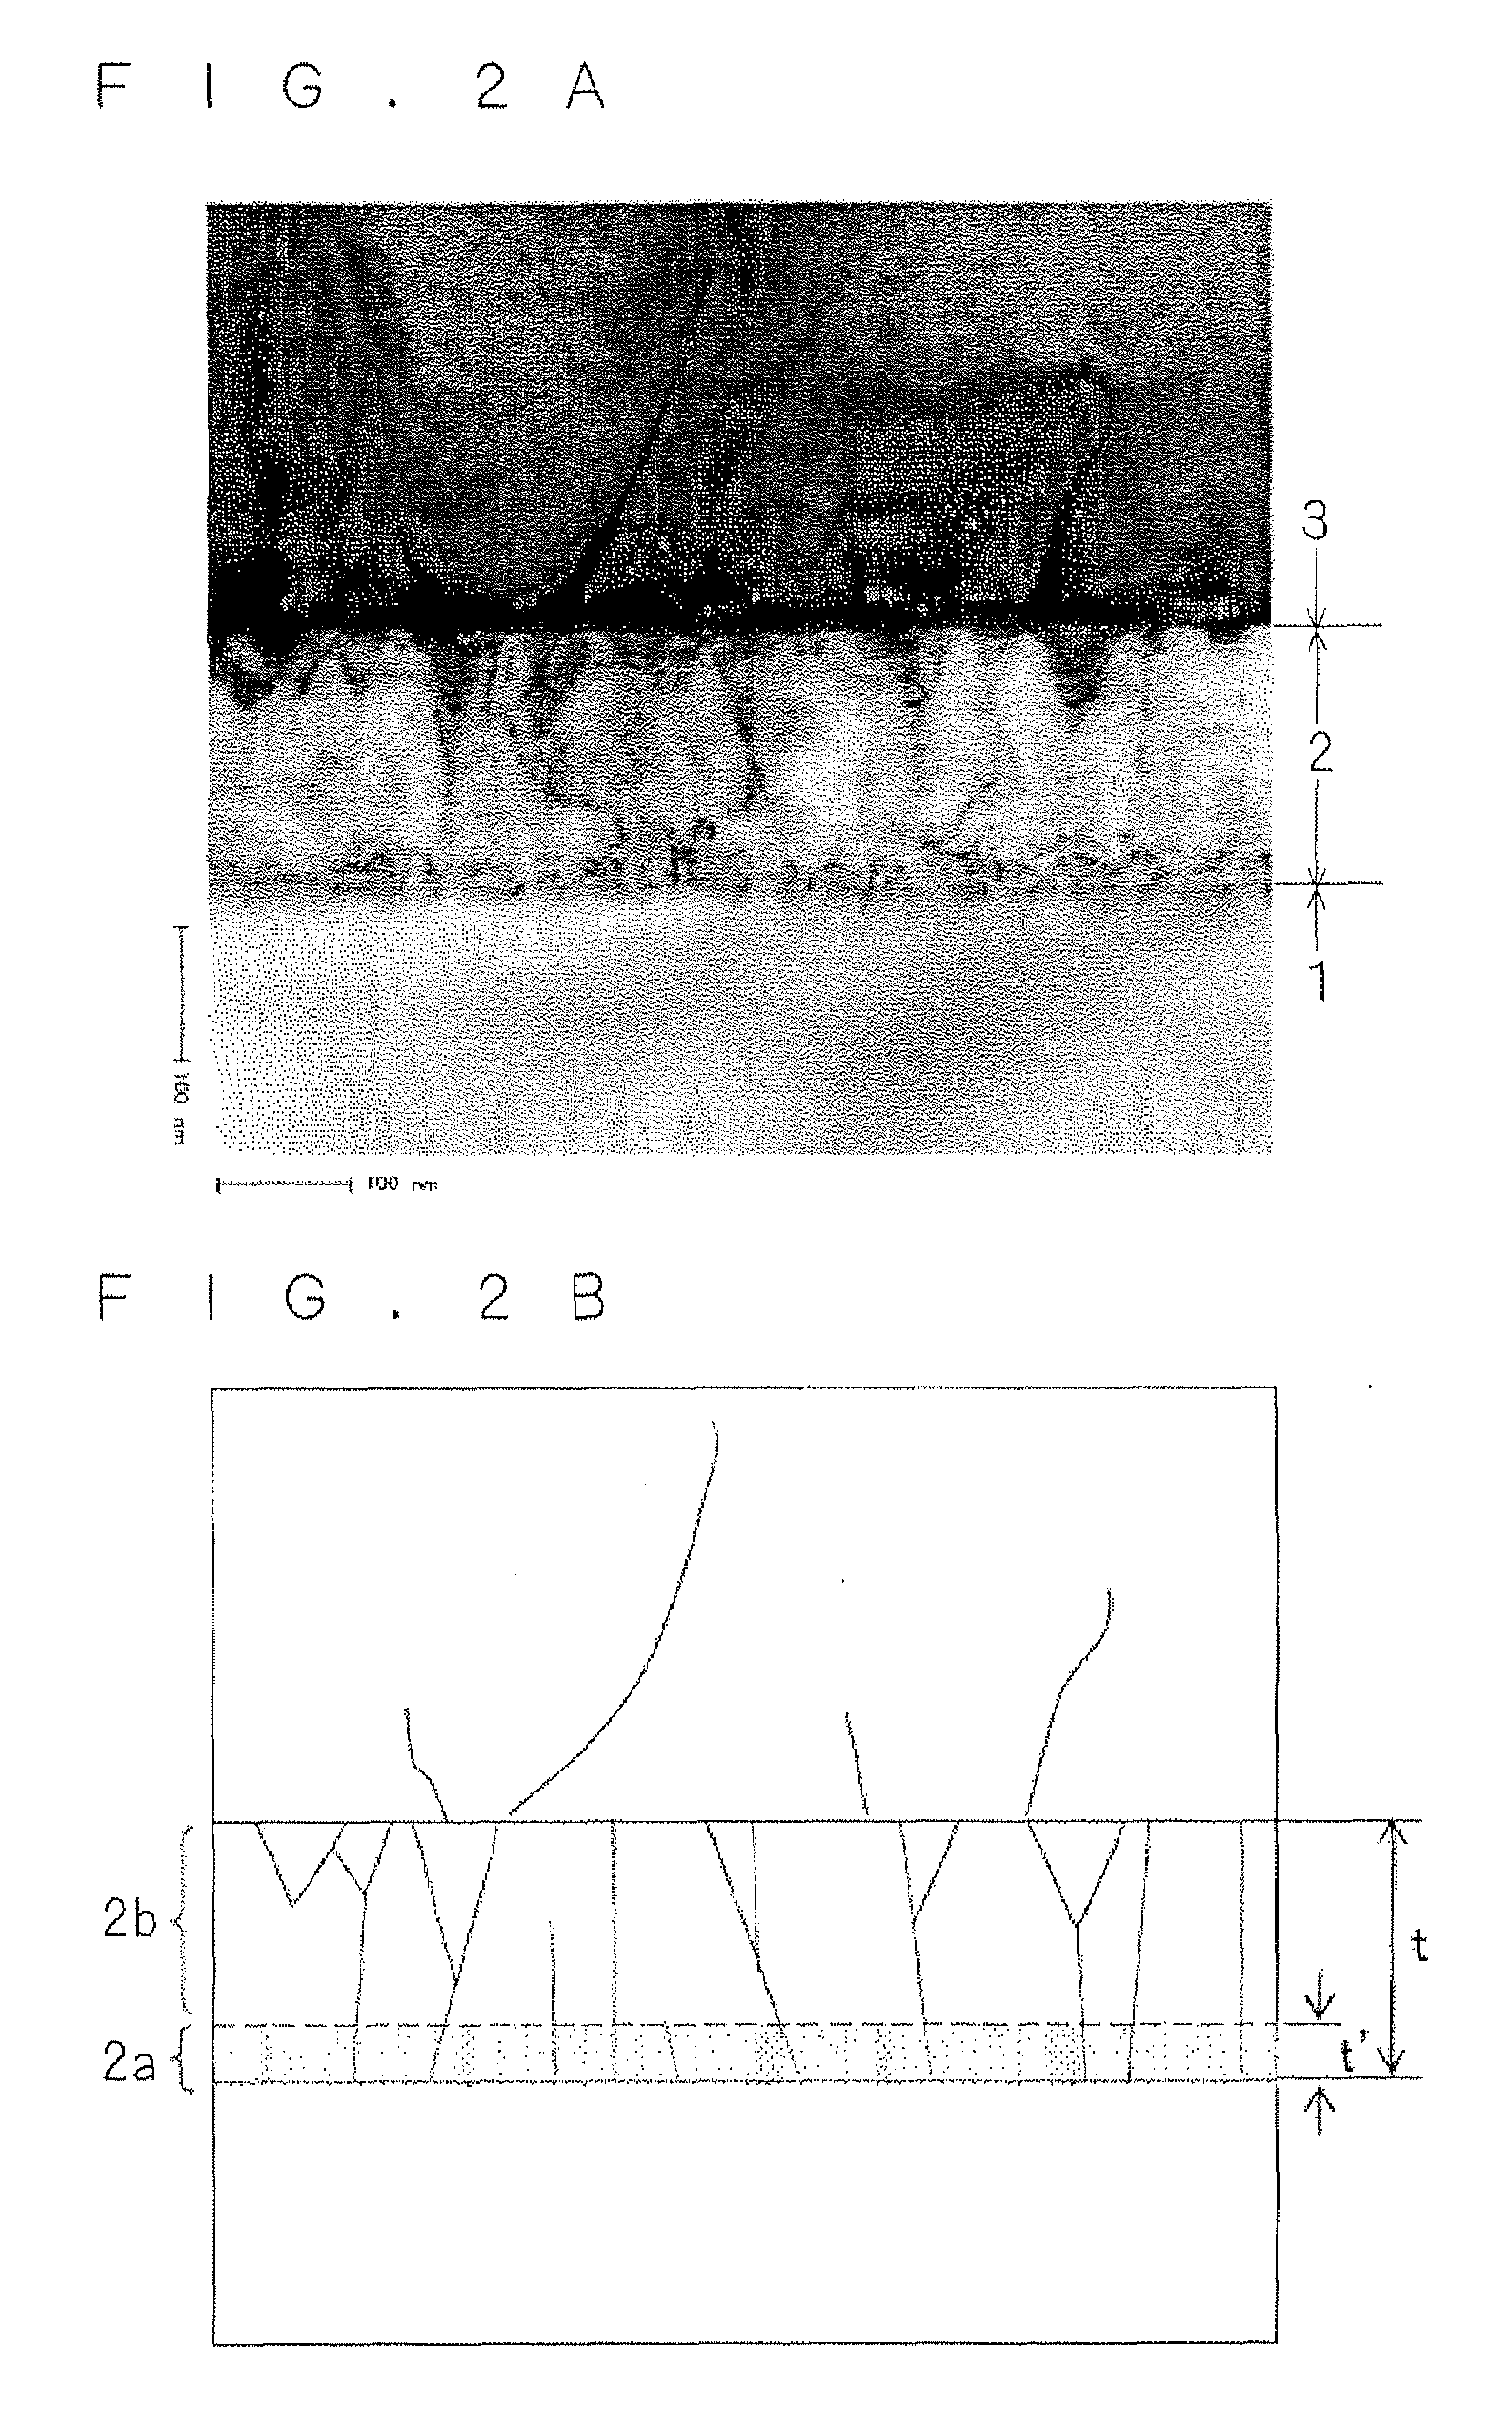 Epitaxial substrate, semiconductor device substrate, and HEMT device